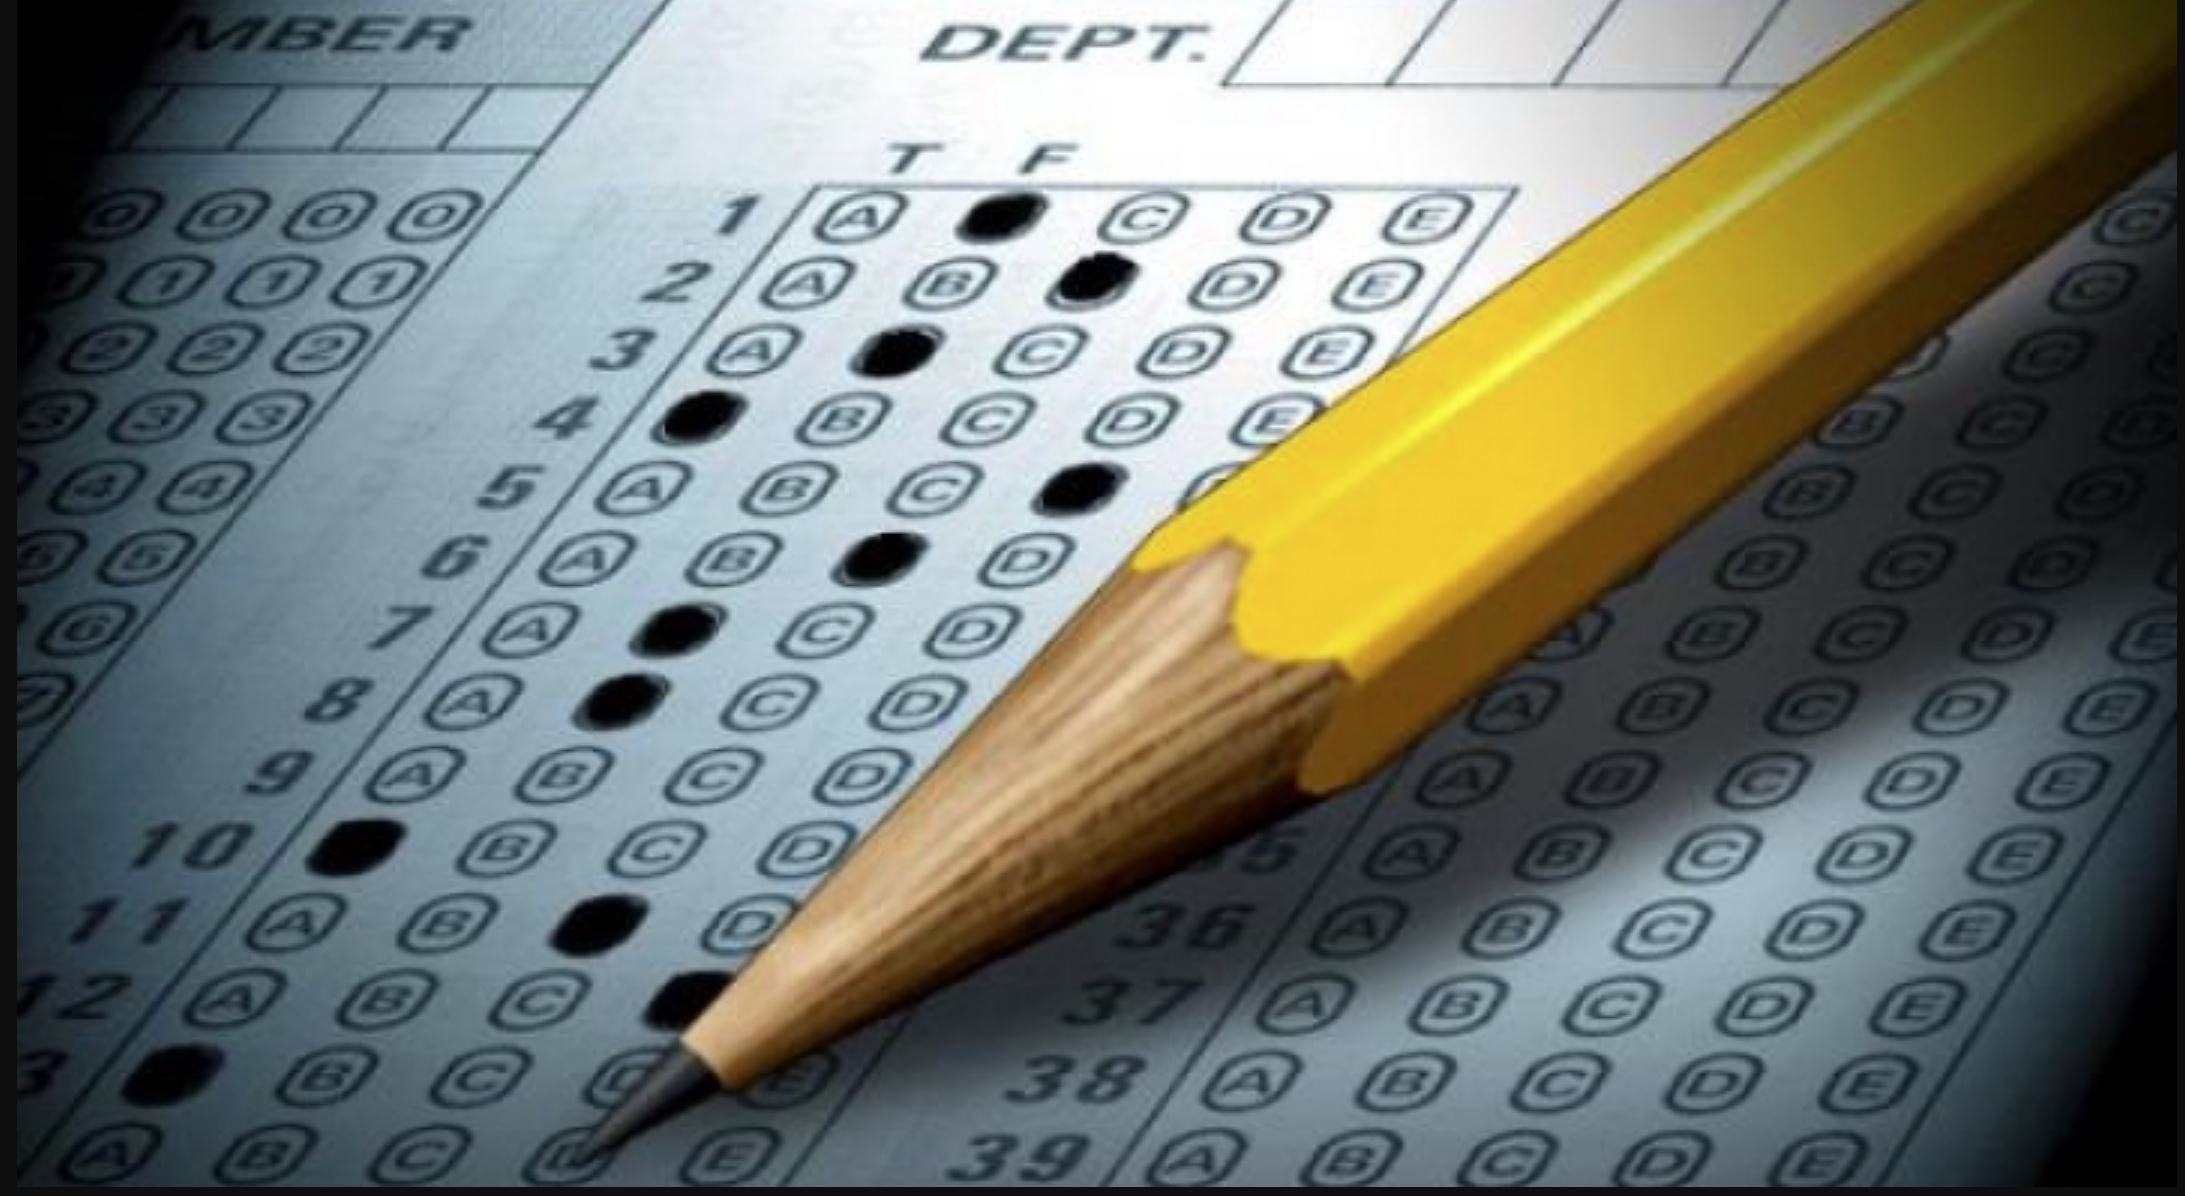 New analysis shows drop in ACT scores at Hewitt-Trussville High School